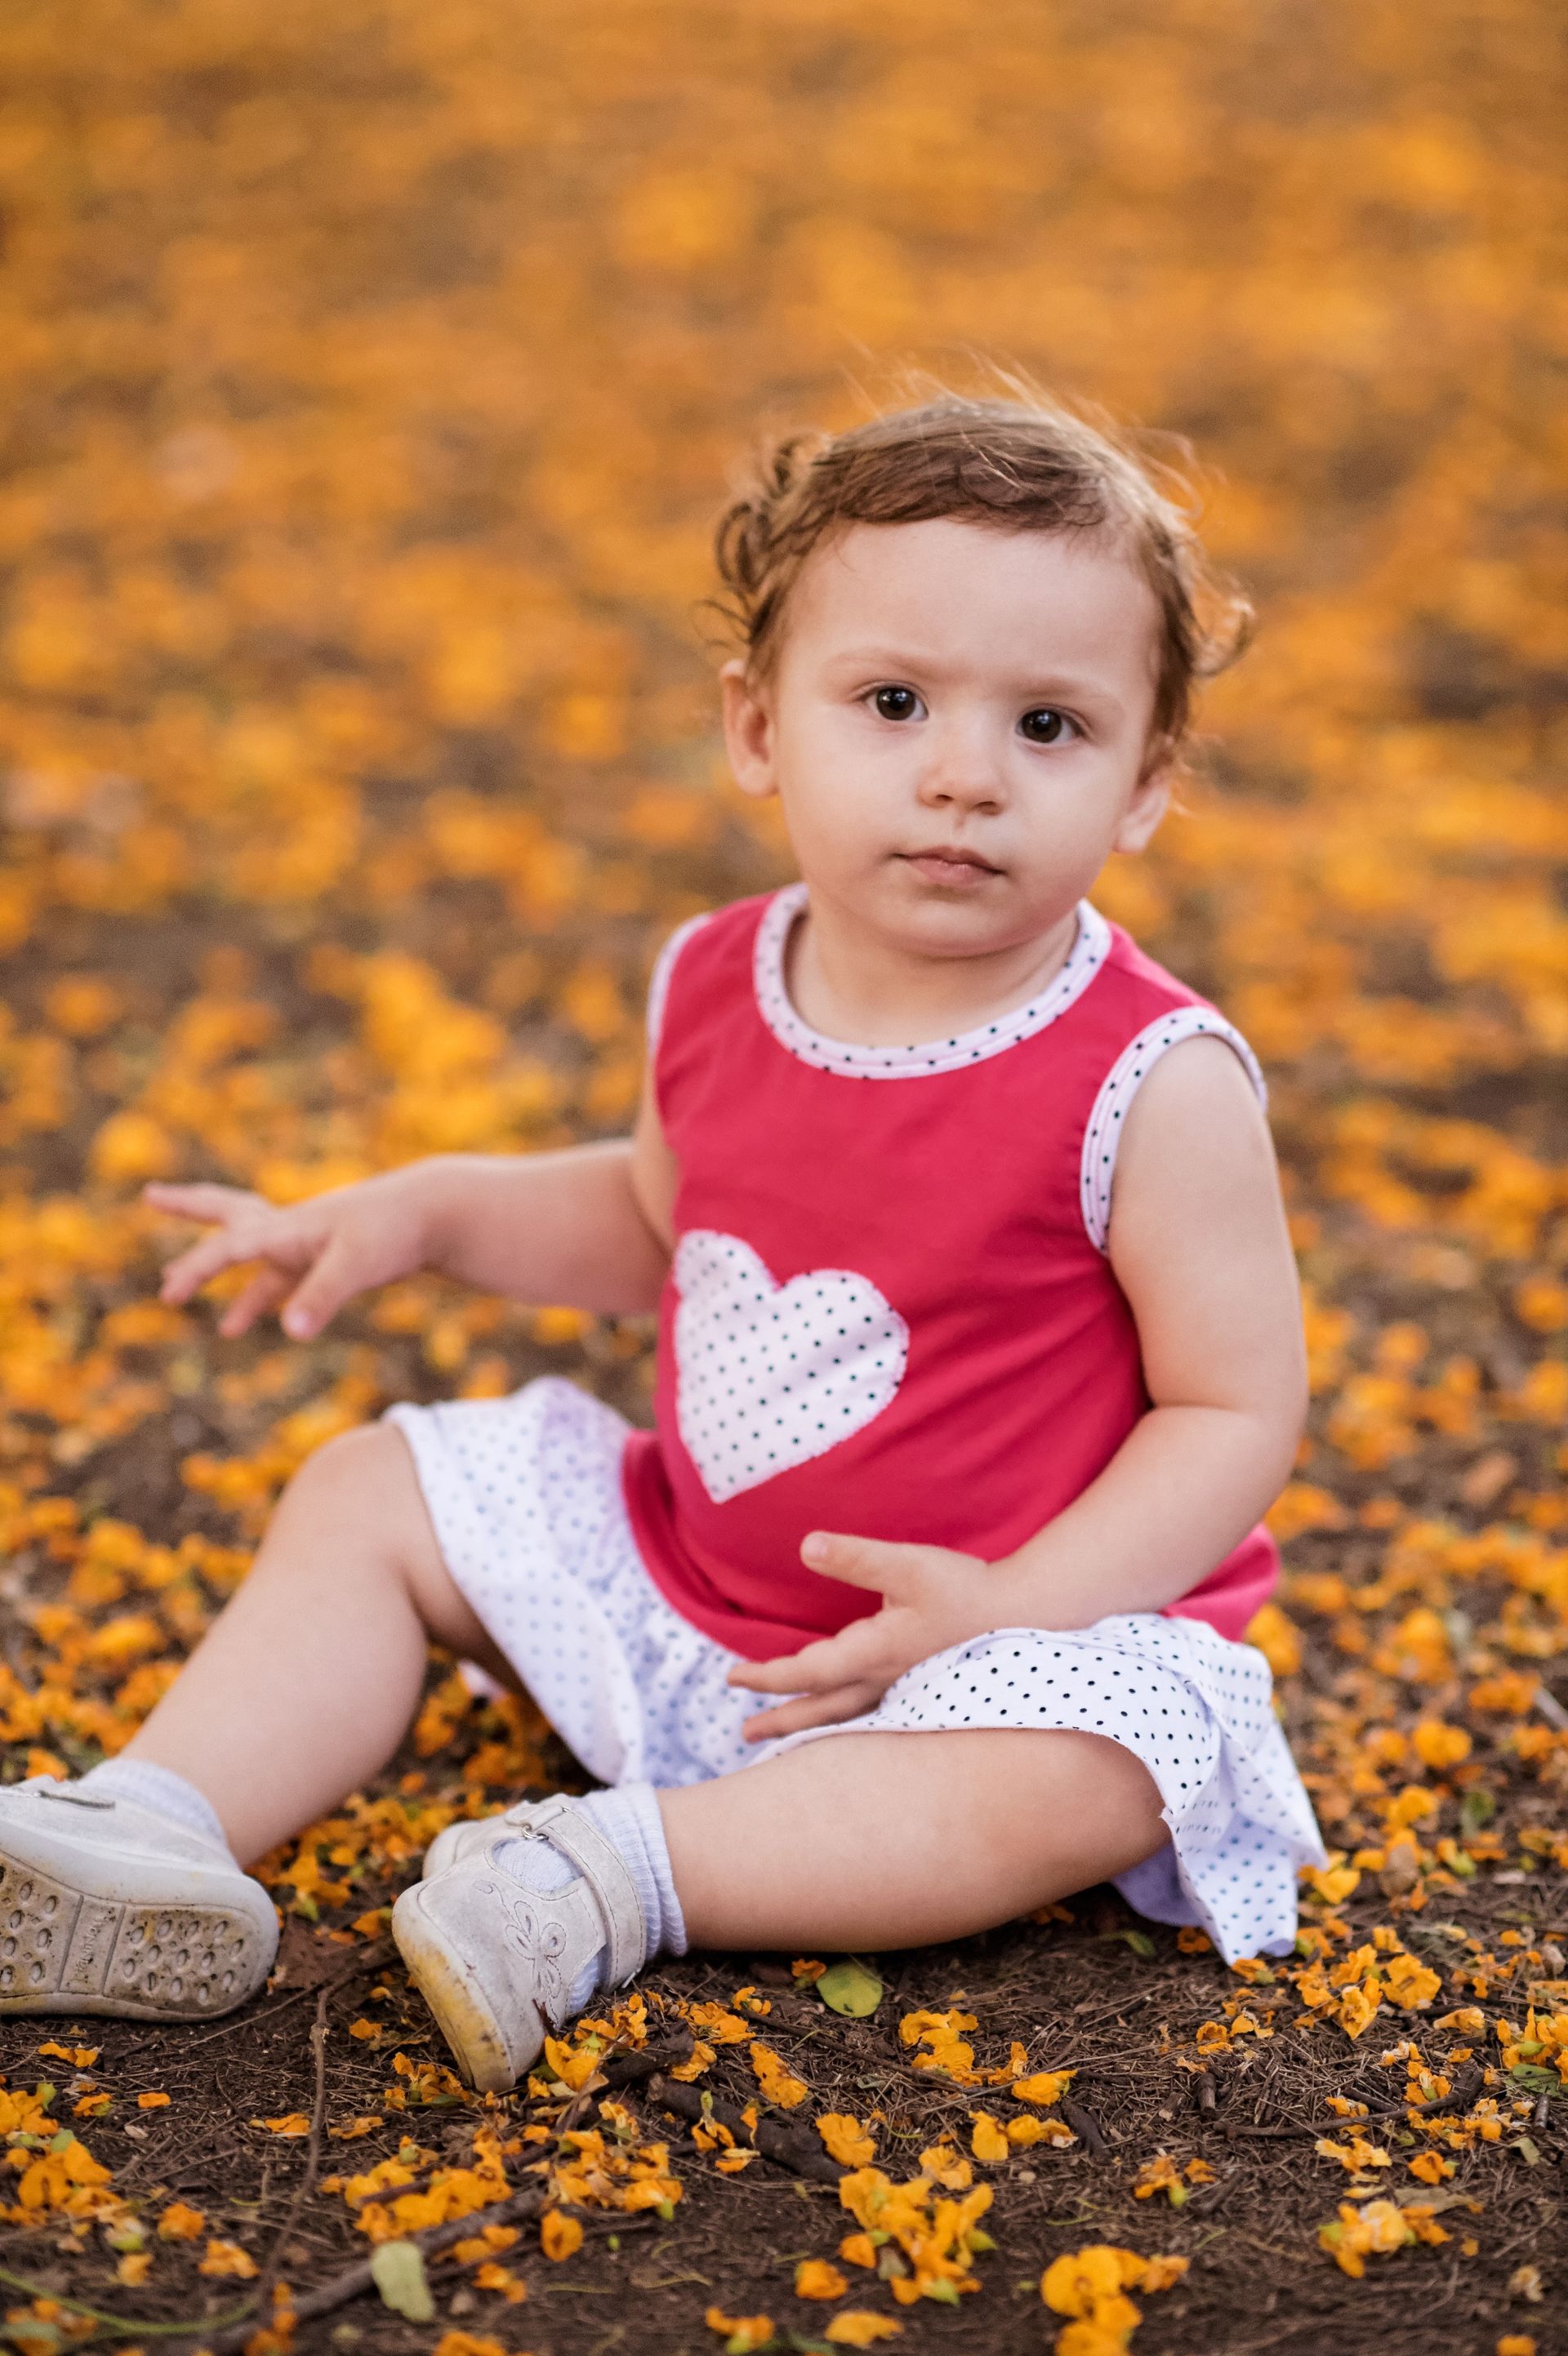 A toddler girl in Argentina wearing a dress with a heart on it.